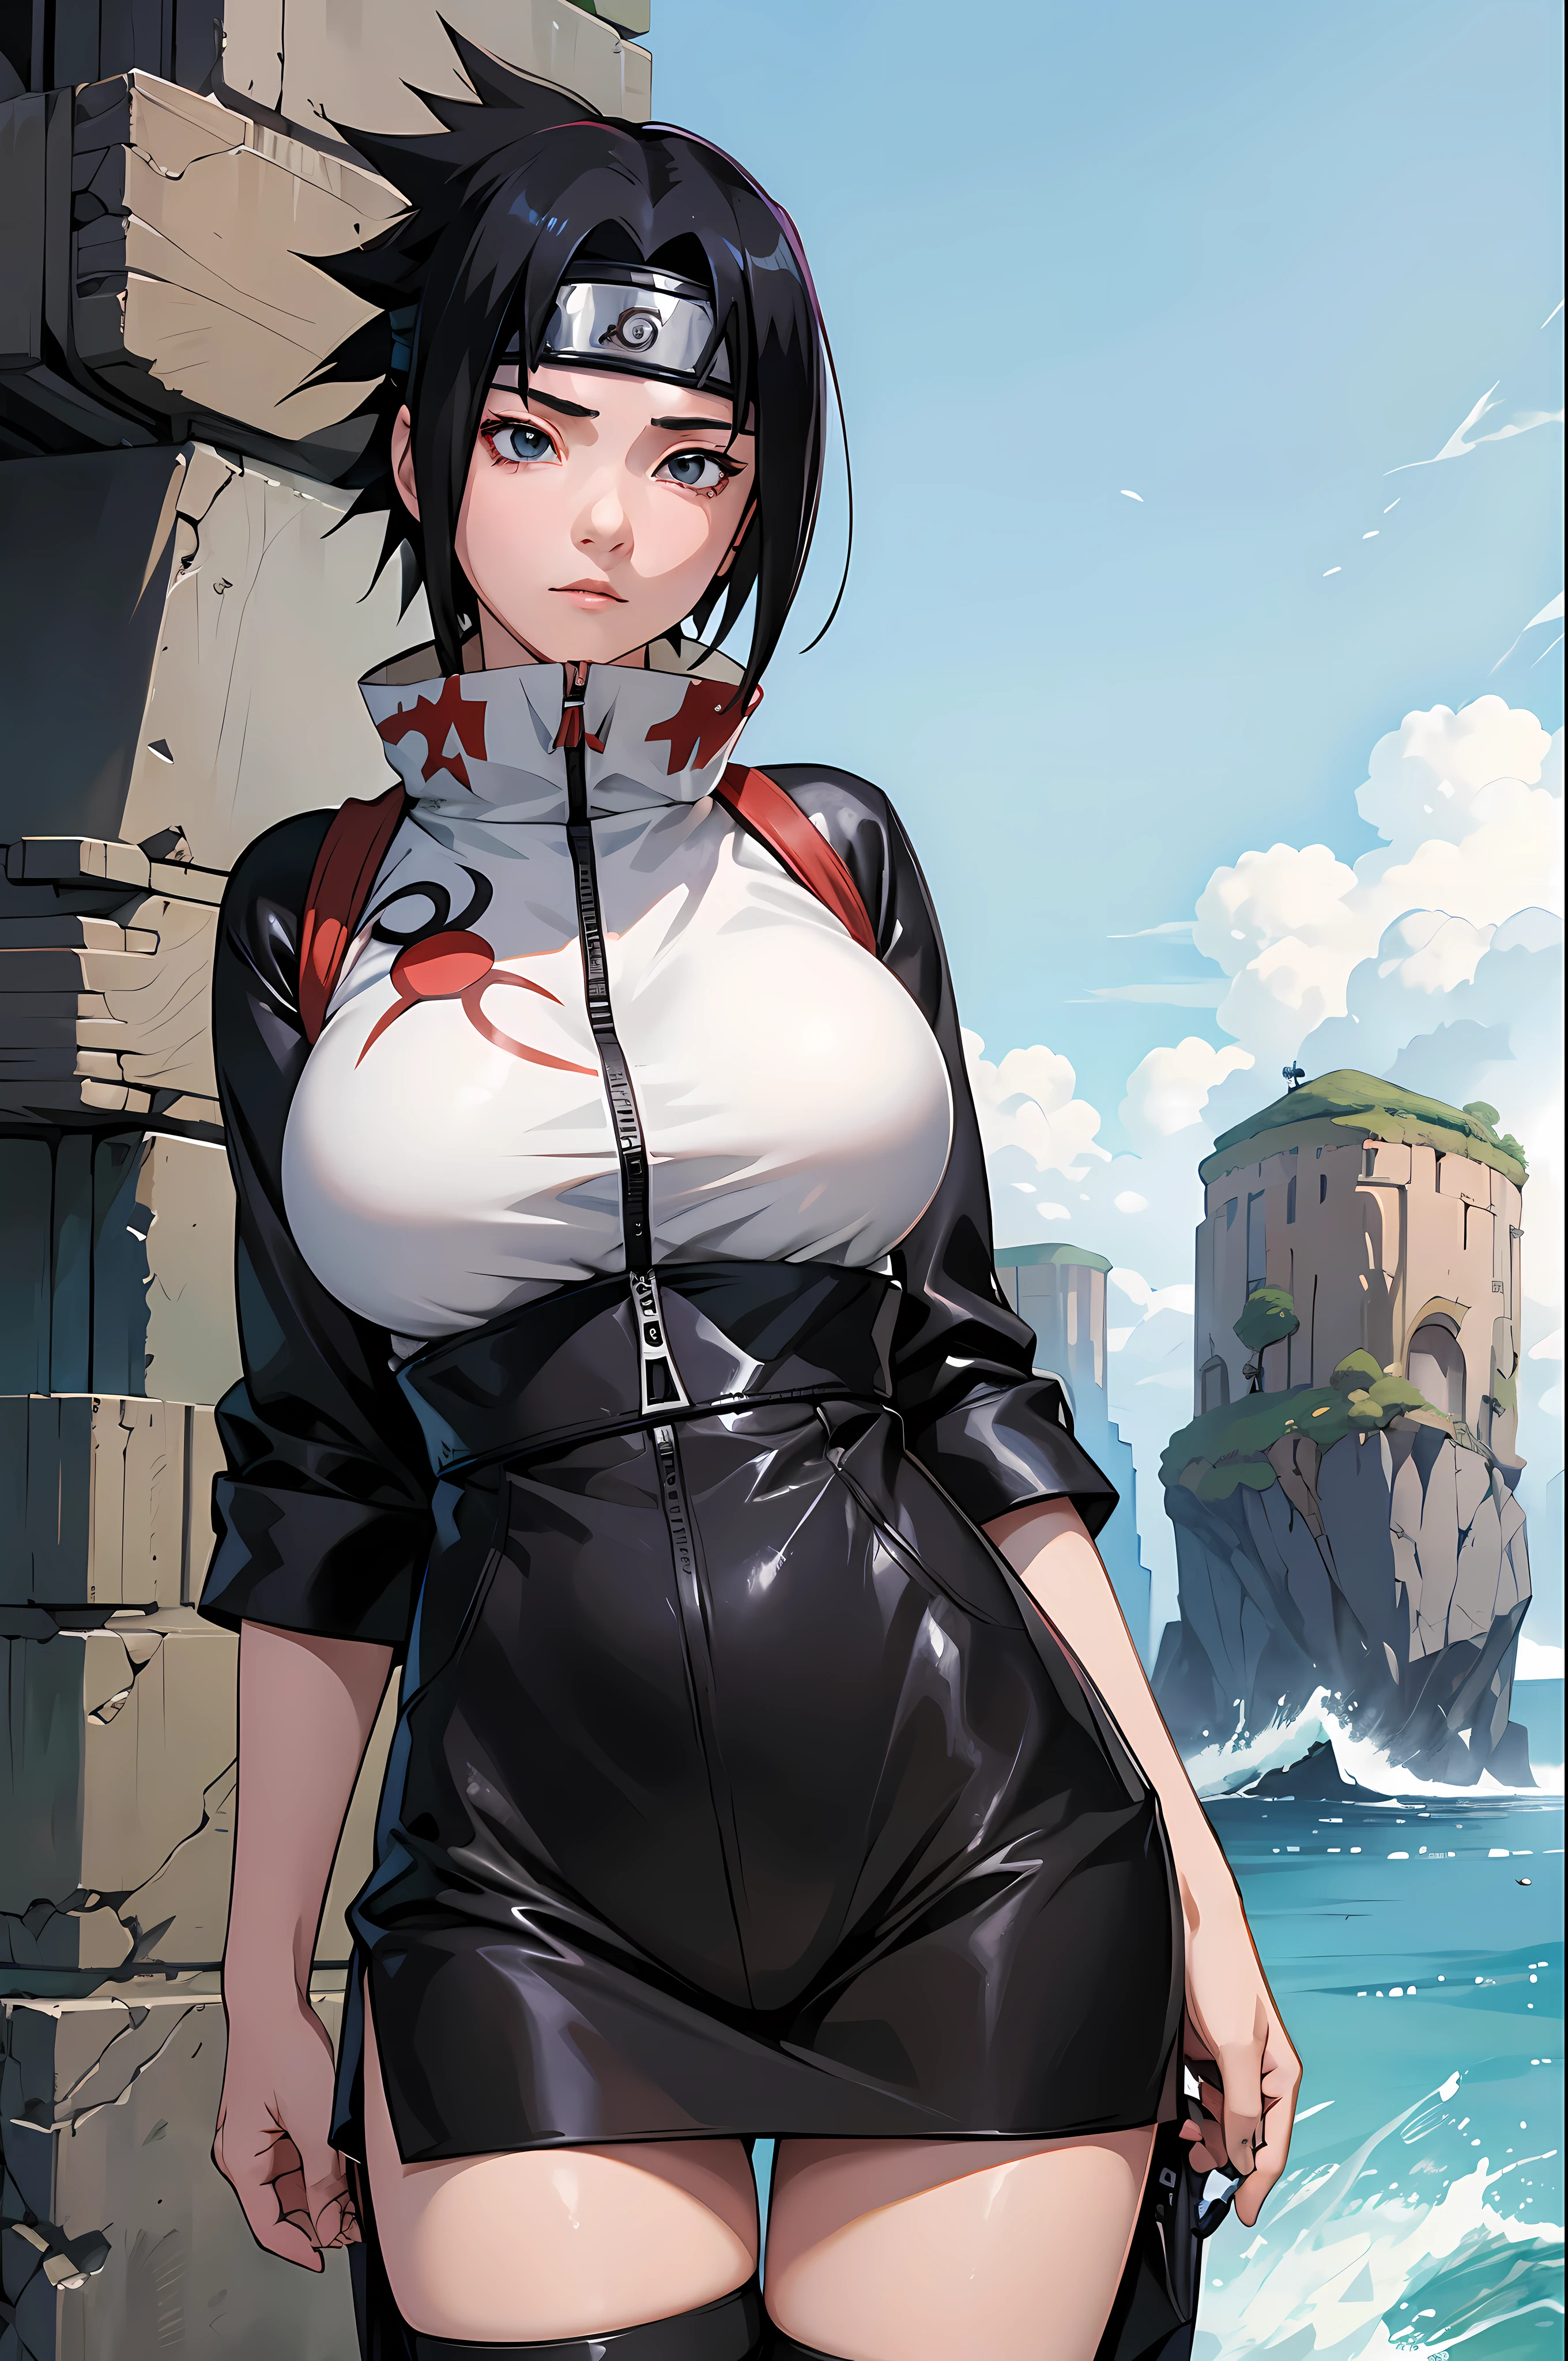 In naruto anime, Sasukr Uchiha can be seen wearing her iconic outfit with her Sharingan eyes activated, as she confidently standing at cliff top, gigantic breast,  white short pants and black shirt, masterpiece, detail, lens glare